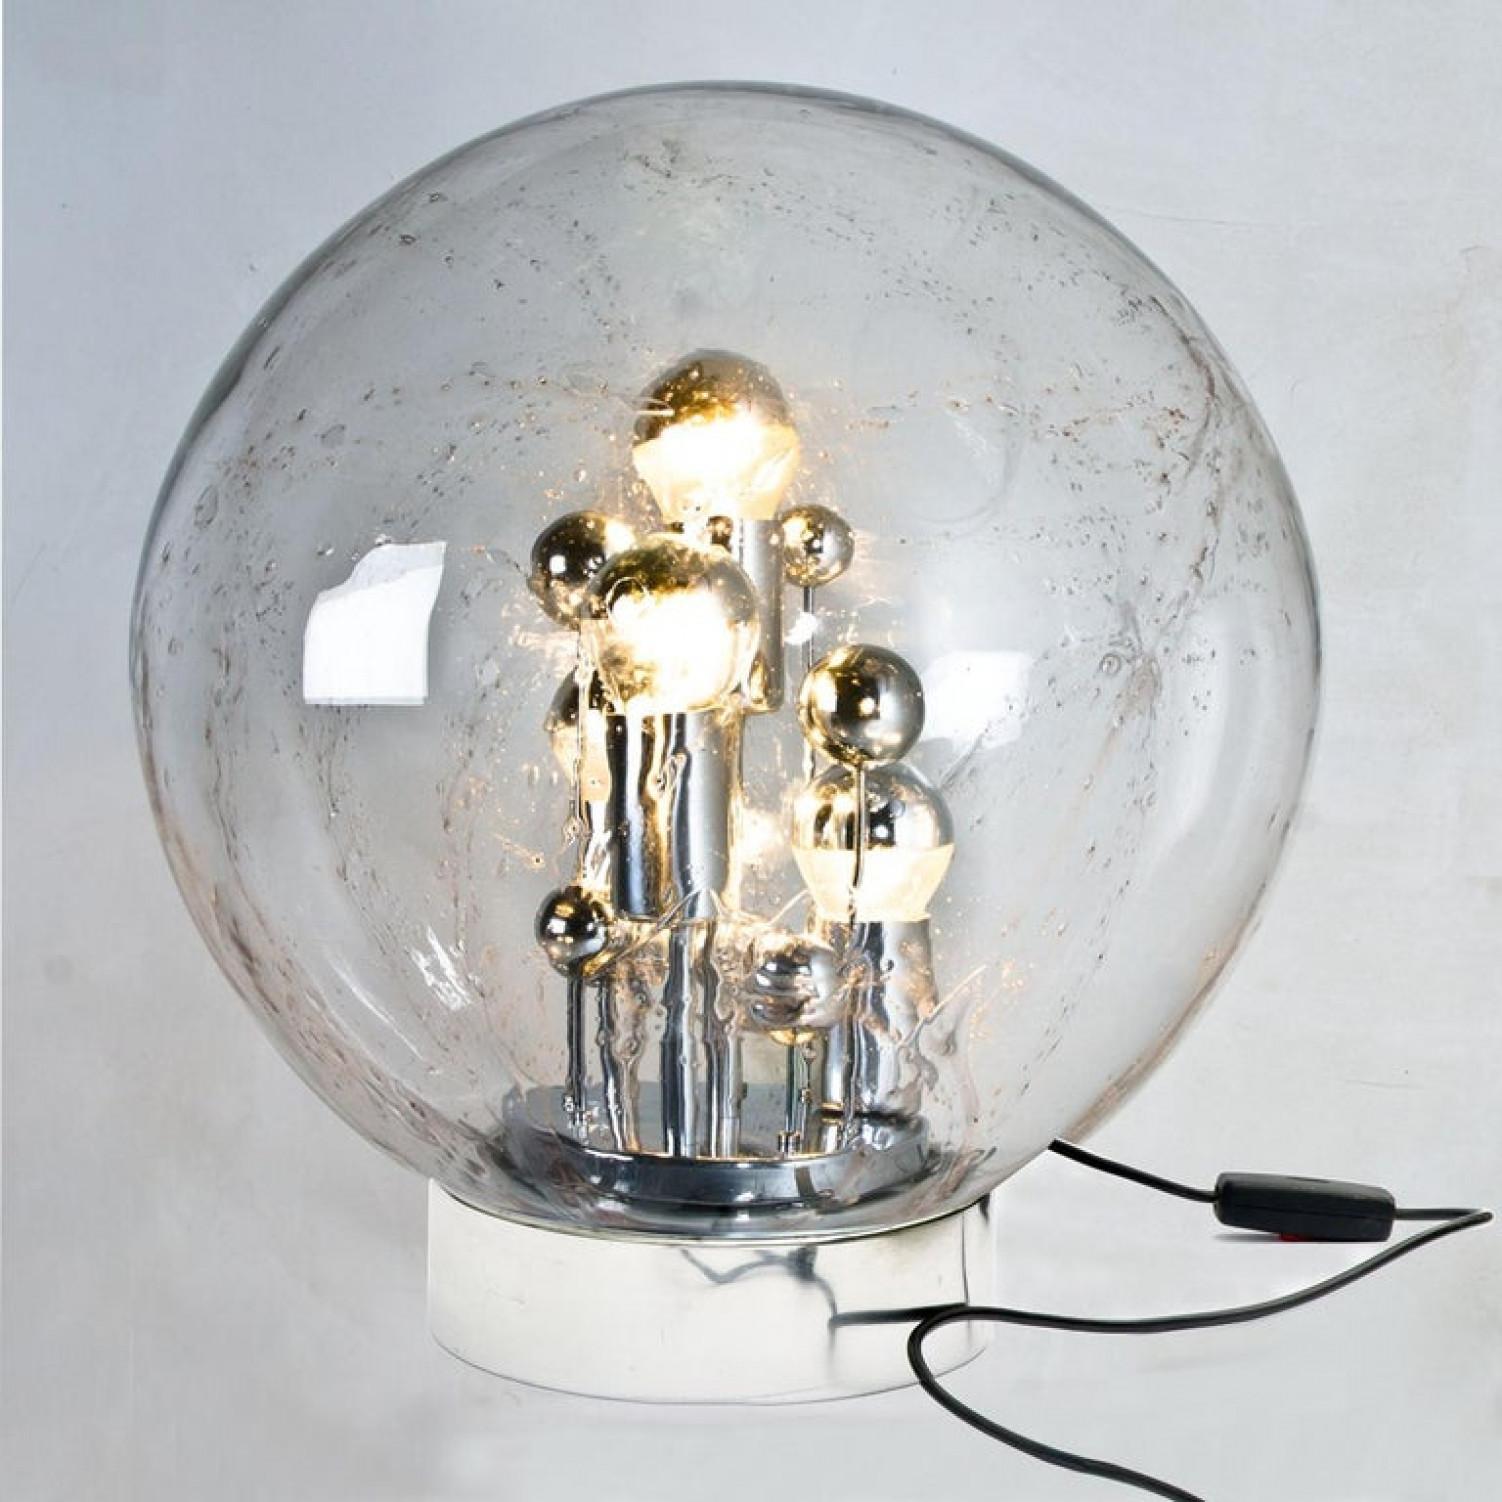 Pair of enormous Doria hand blown glass sphere on chrome base lamps, Germany, circa 1970. This exceptional artefact of modern design reflects the extreme interest in modernism across Europe during this period. This unique lamp not only functions as